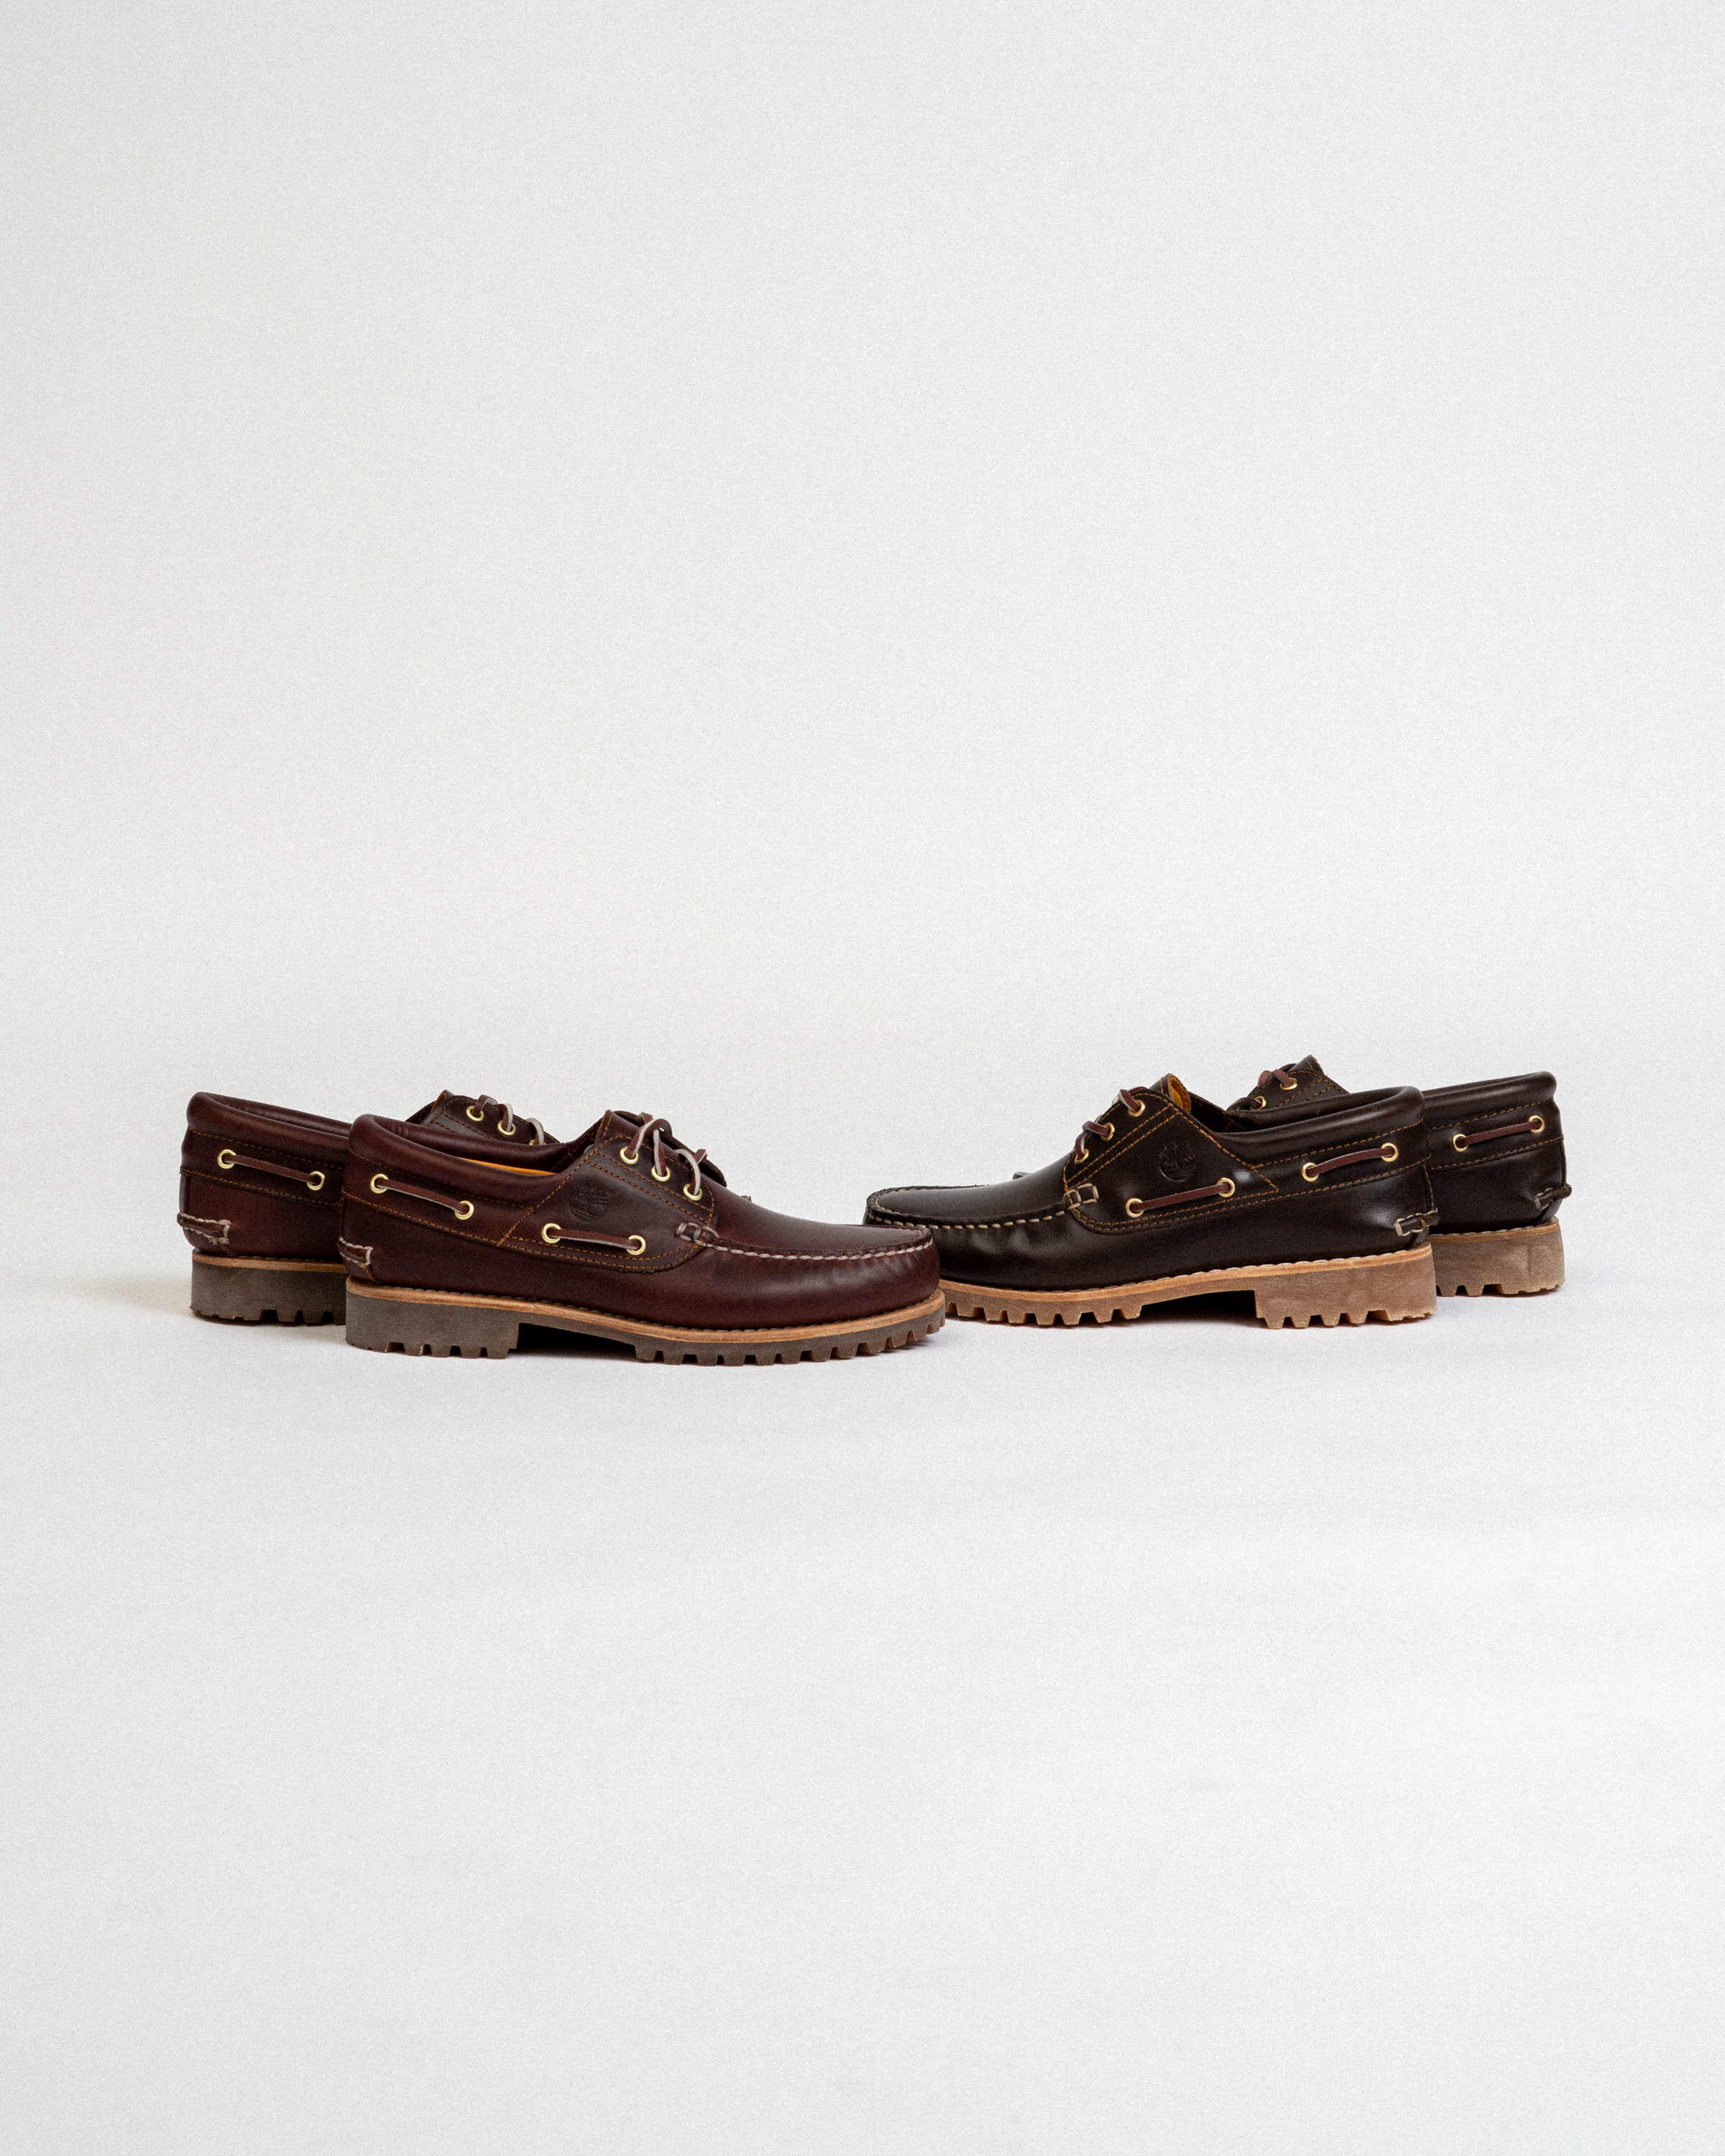 Timberland Authentic BOAT SHOE